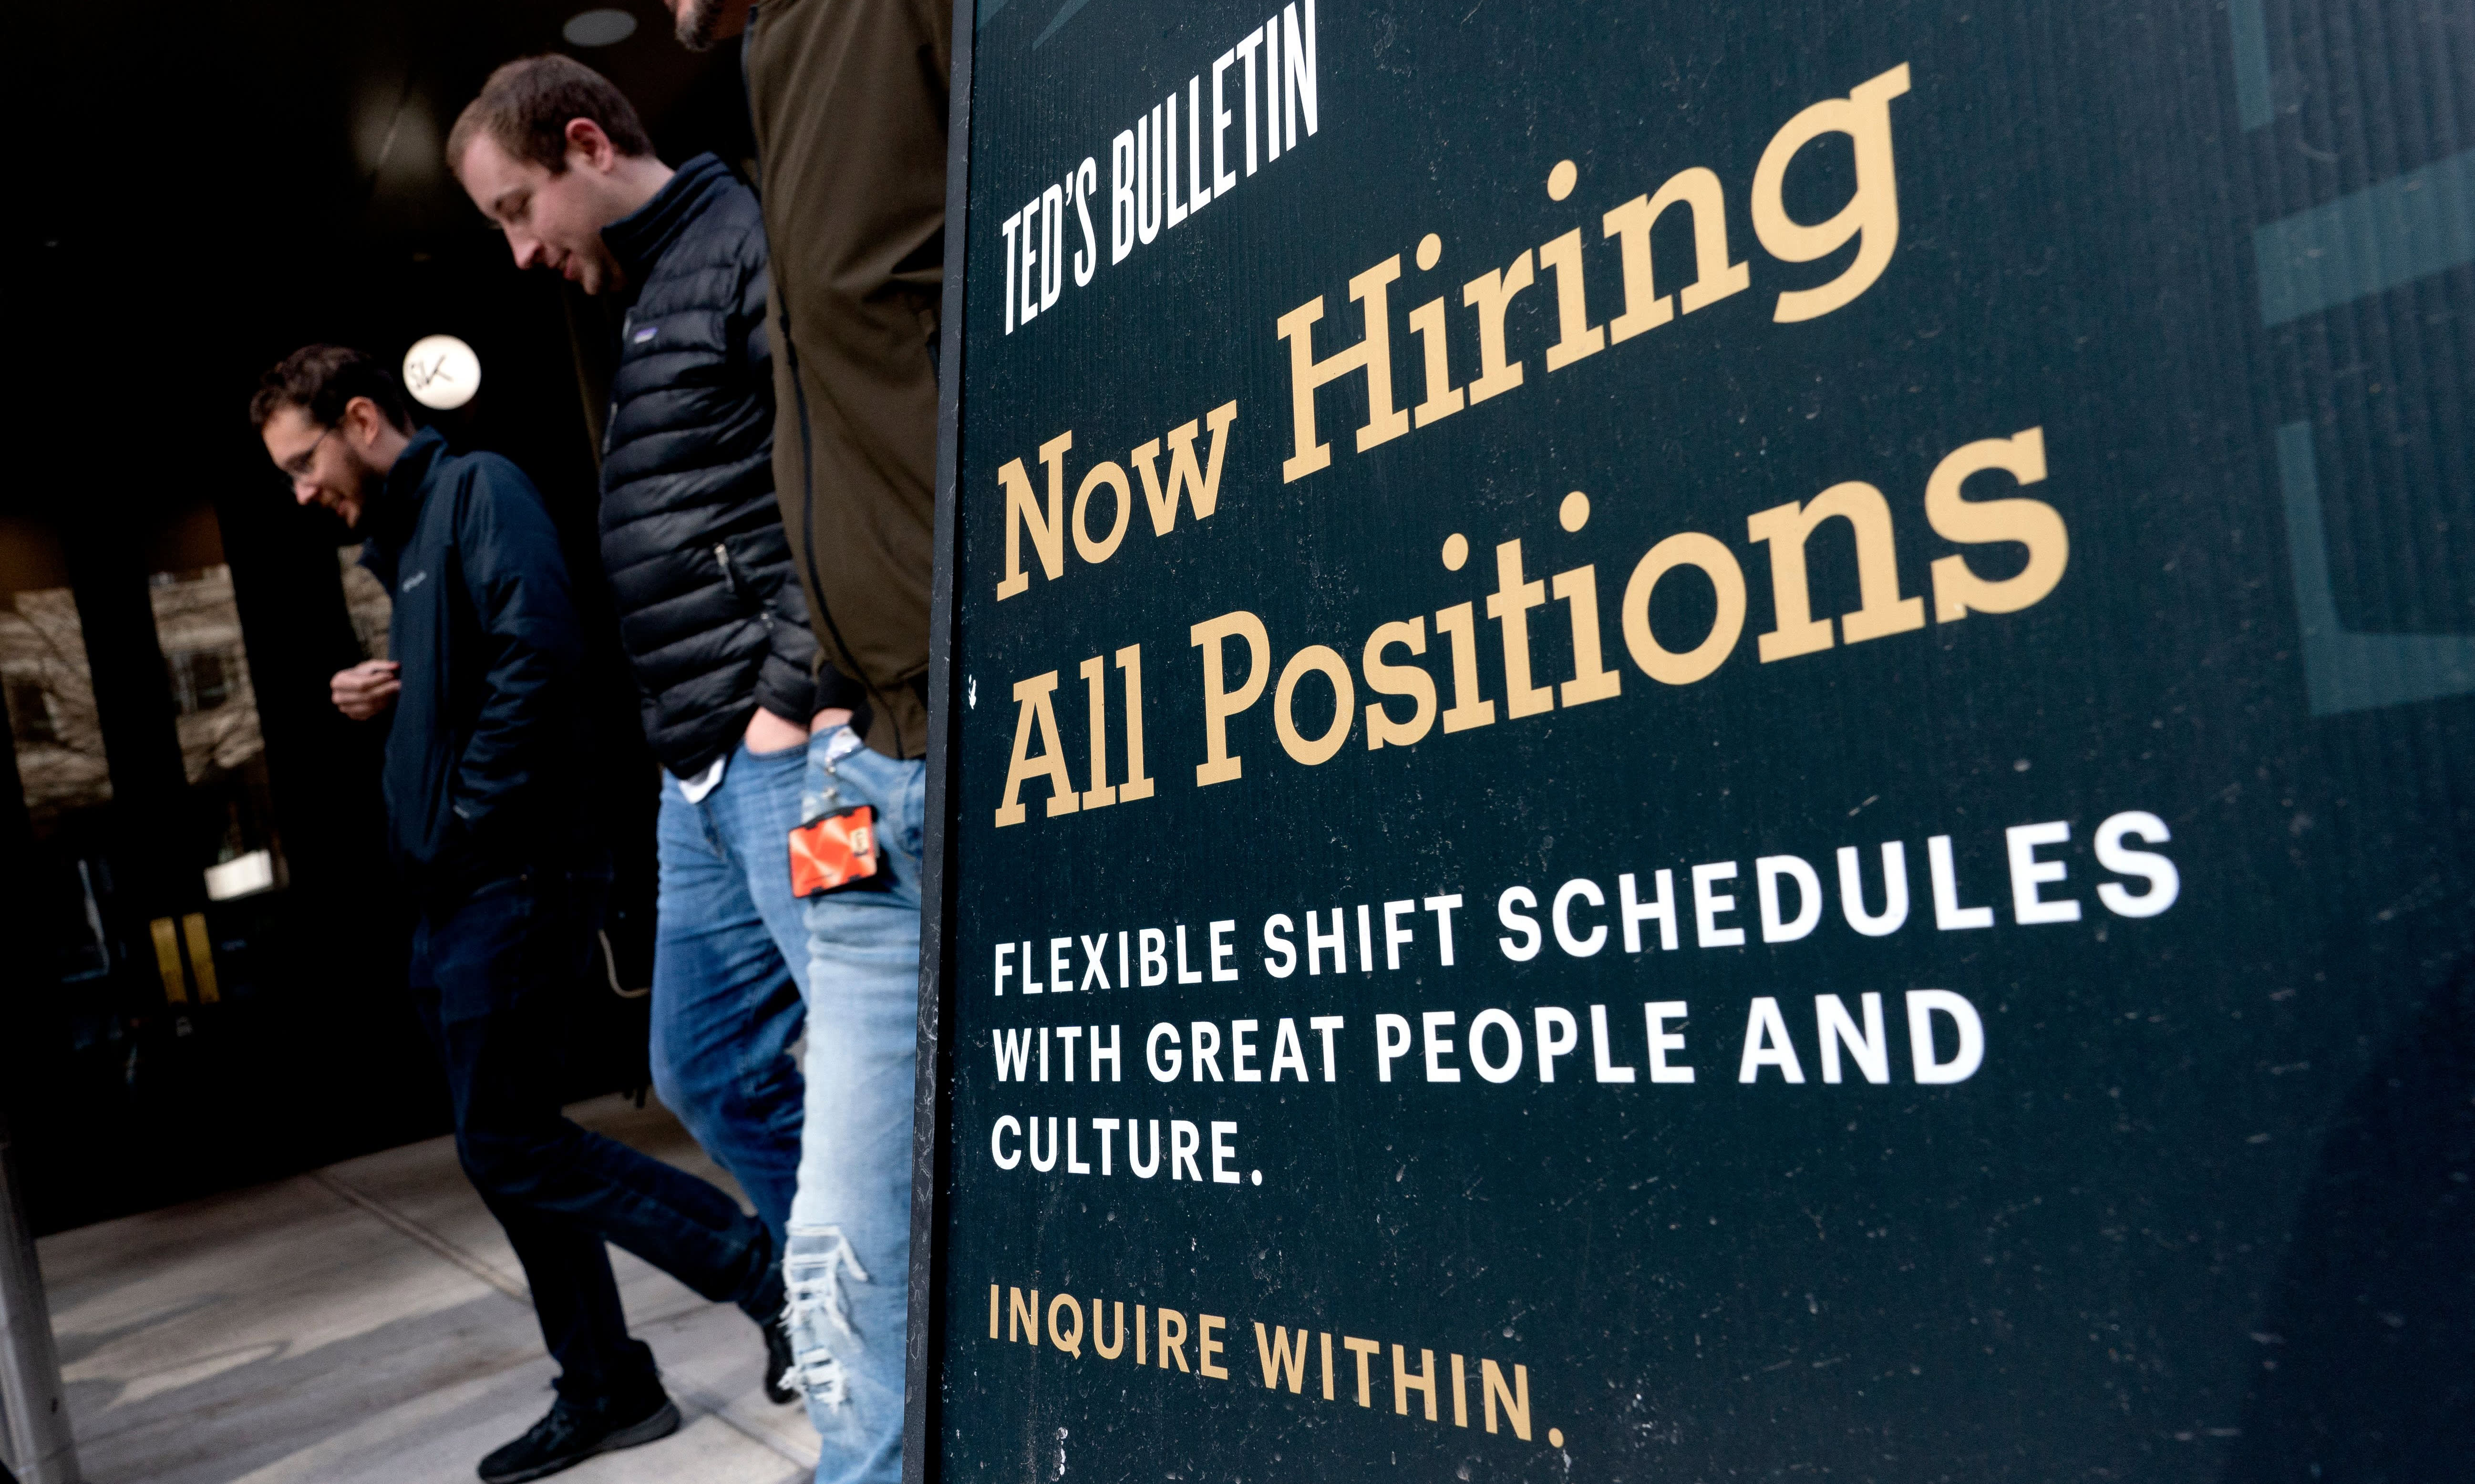 Workers Are 'Rage Quitting' Jobs in a Tightening Labor Market